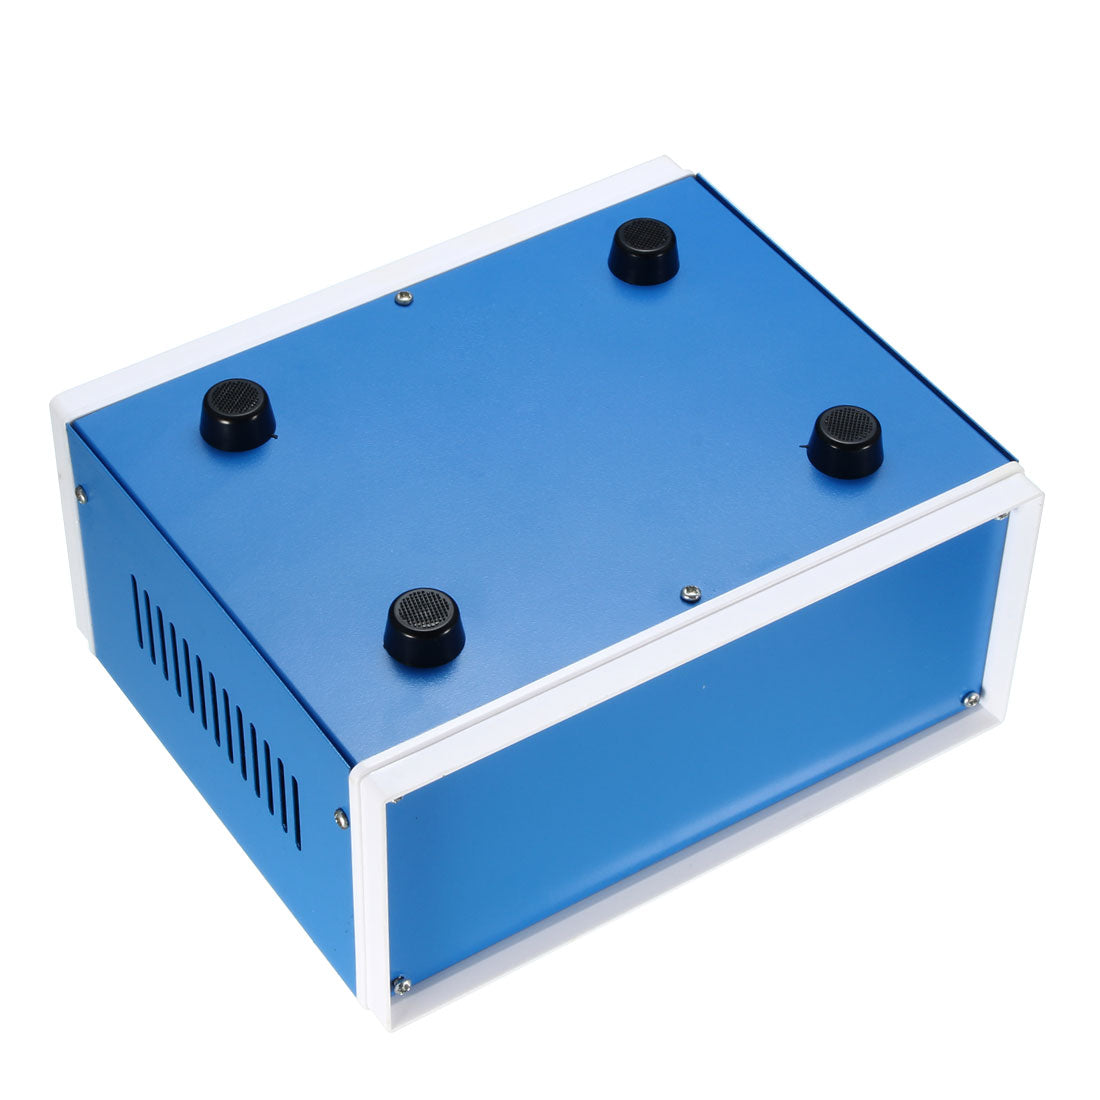 uxcell Uxcell 200 x 165 x 90 Electronic Iron DIY Junction Box Enclosure Case Blue